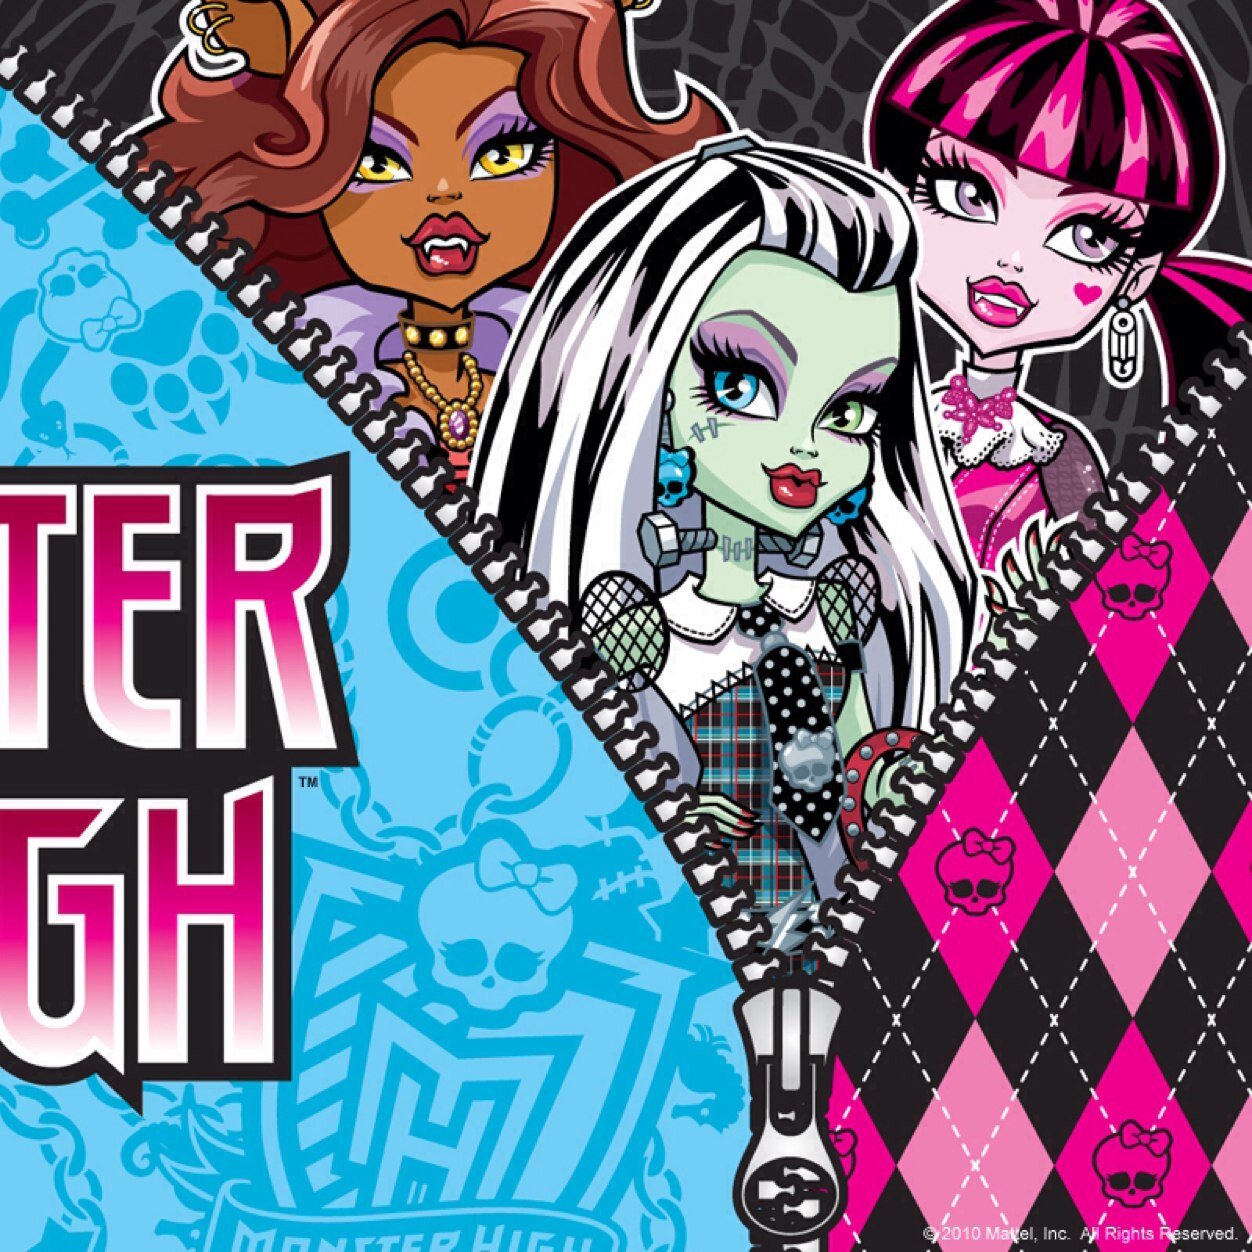 This is monster high official